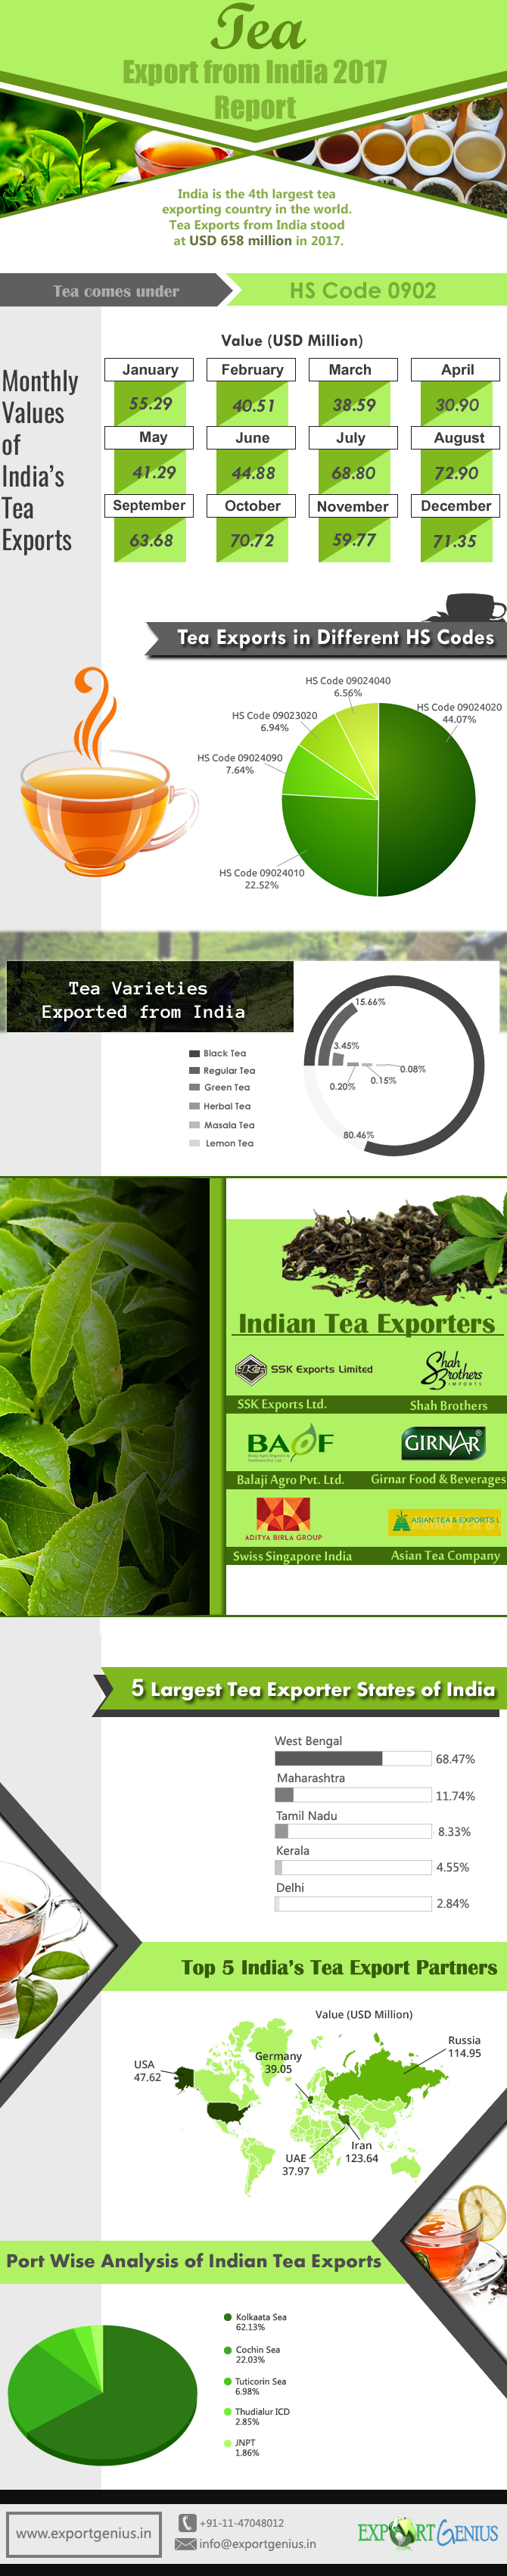 Tea Export from India